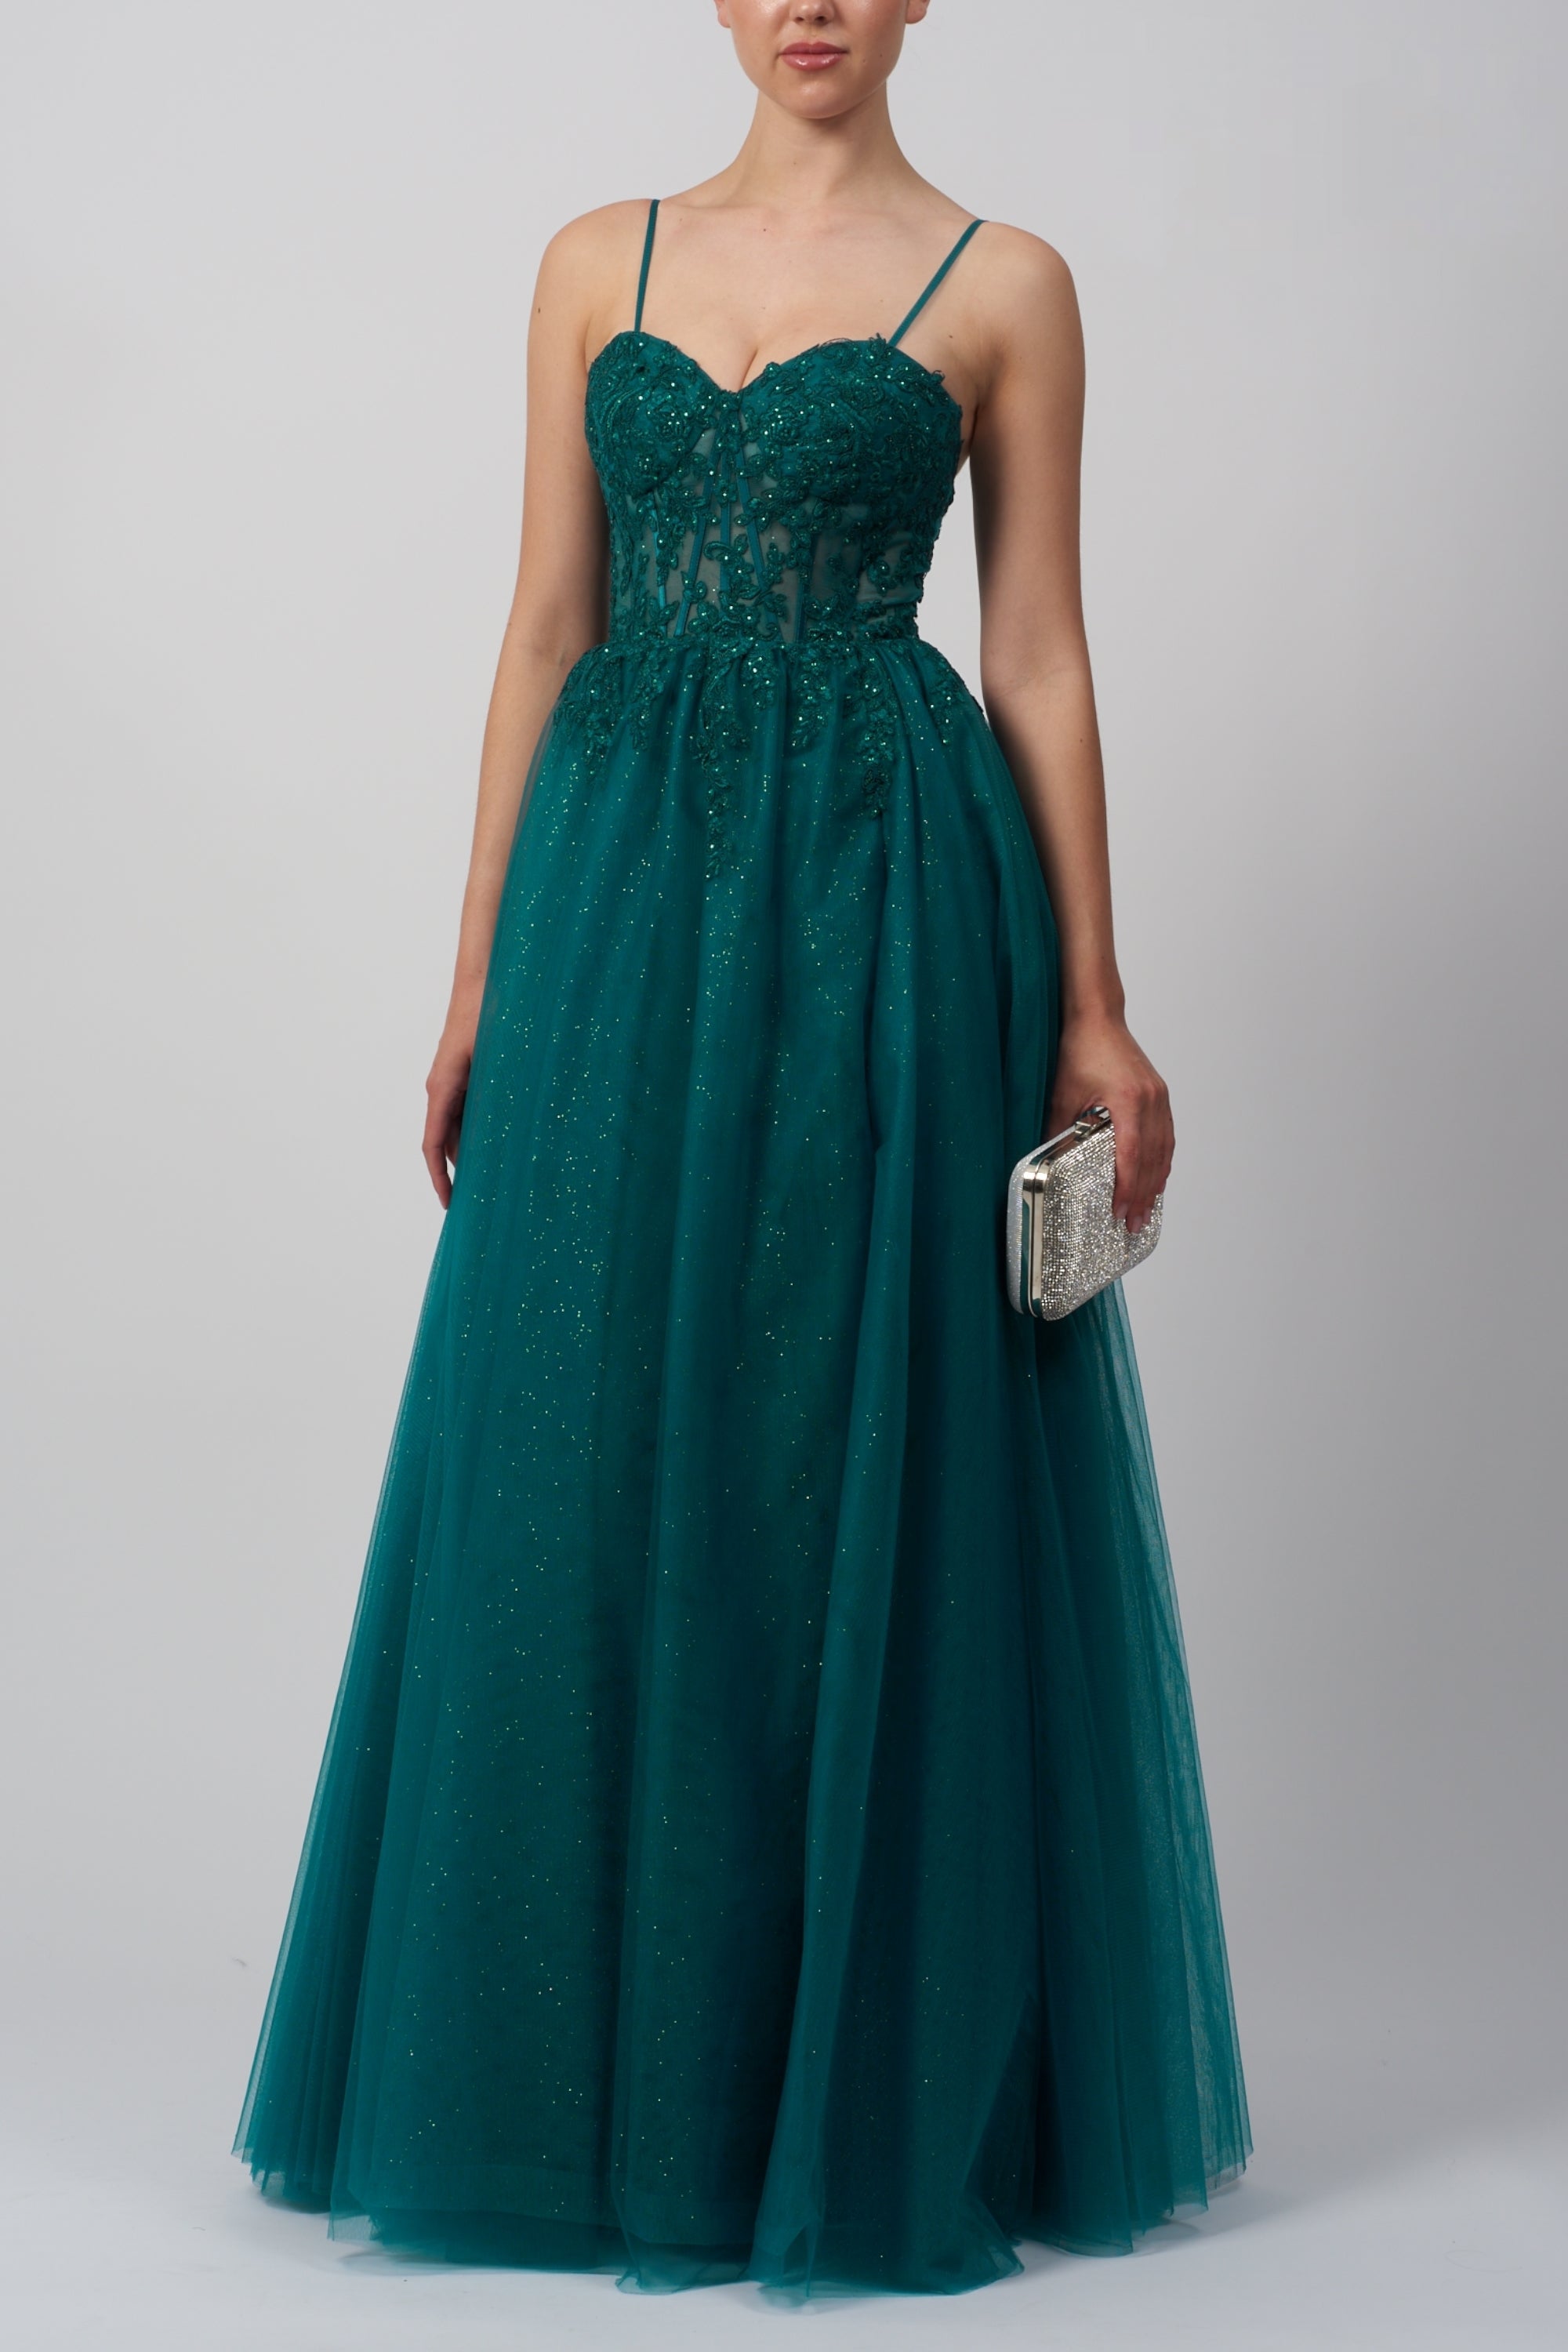 Dark Green Plus Size Mermaid Forest Green Evening Dress With Zipper, Lace  Up Back, And Beaded Applique Pleats From Babybeautiful, $119.35 | DHgate.Com